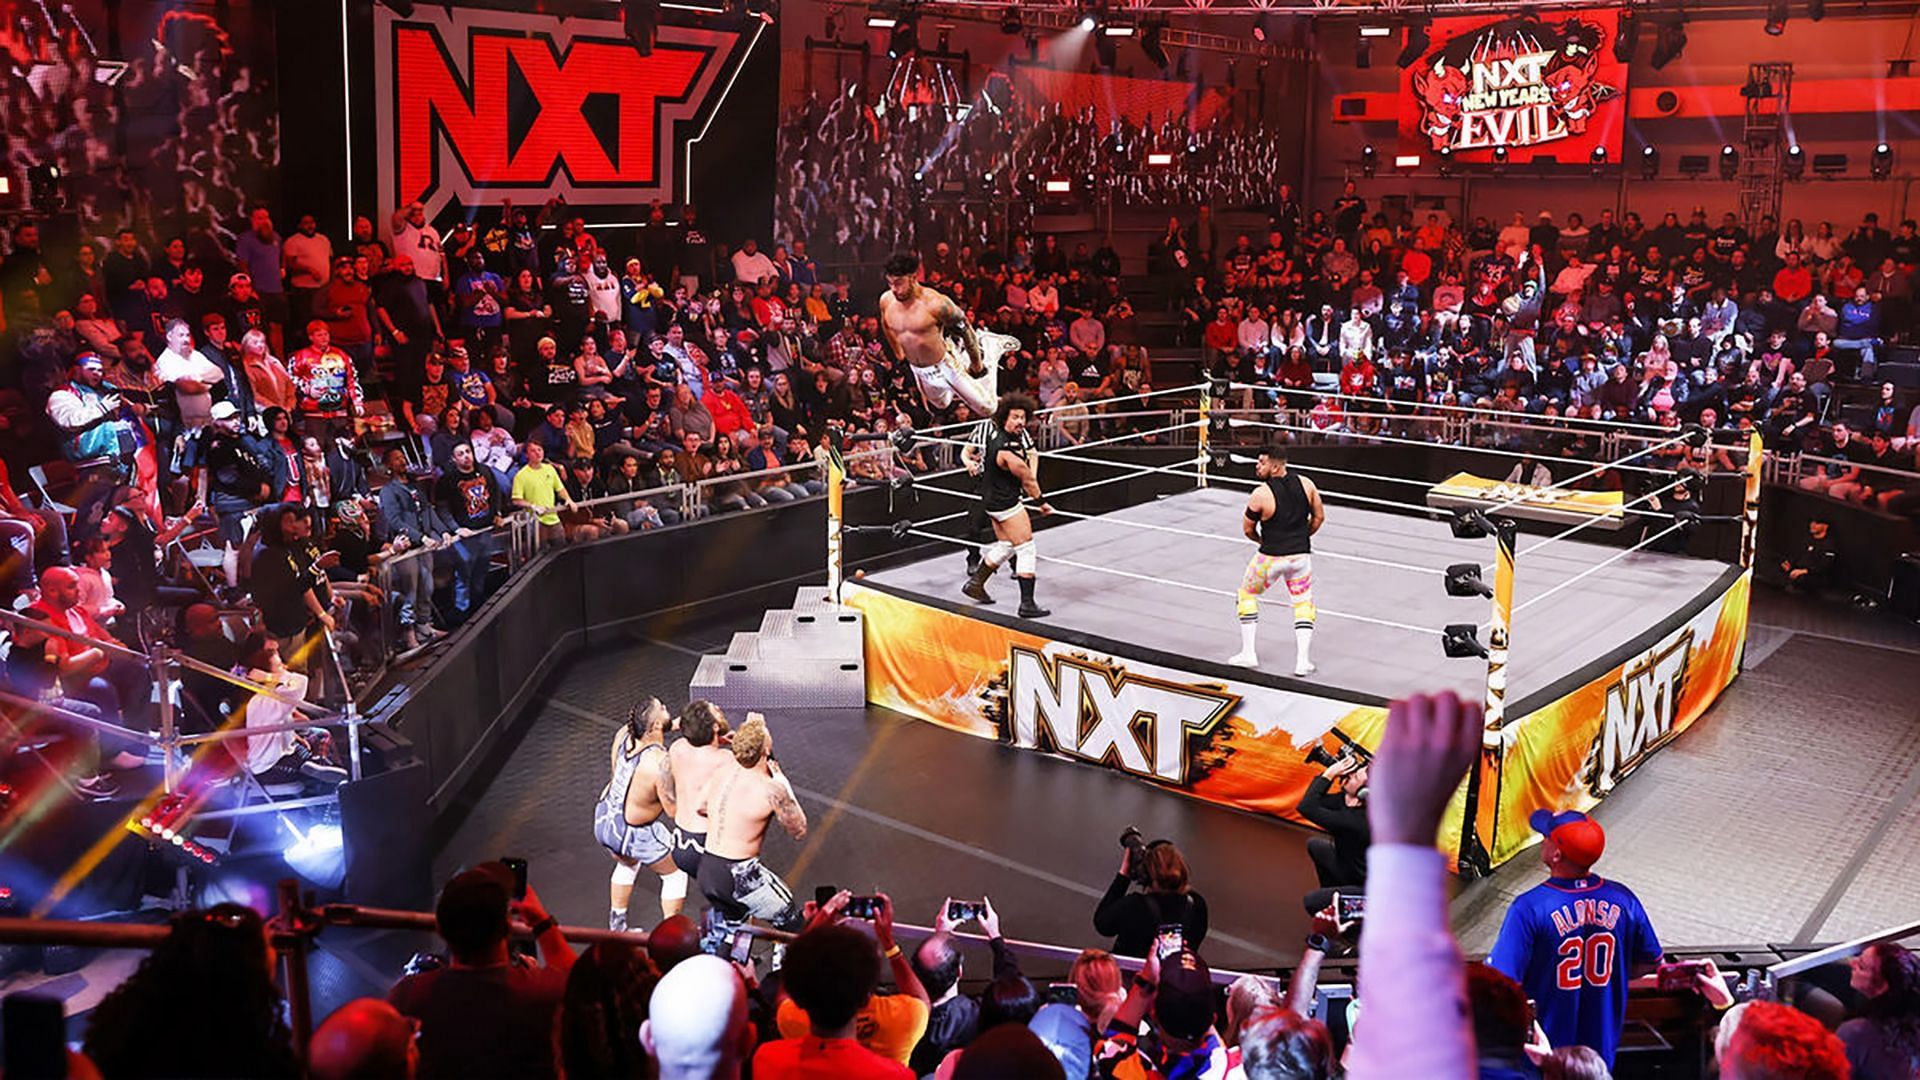 Joaquin Wilde pulled off an amazing stunt at NXT New Year